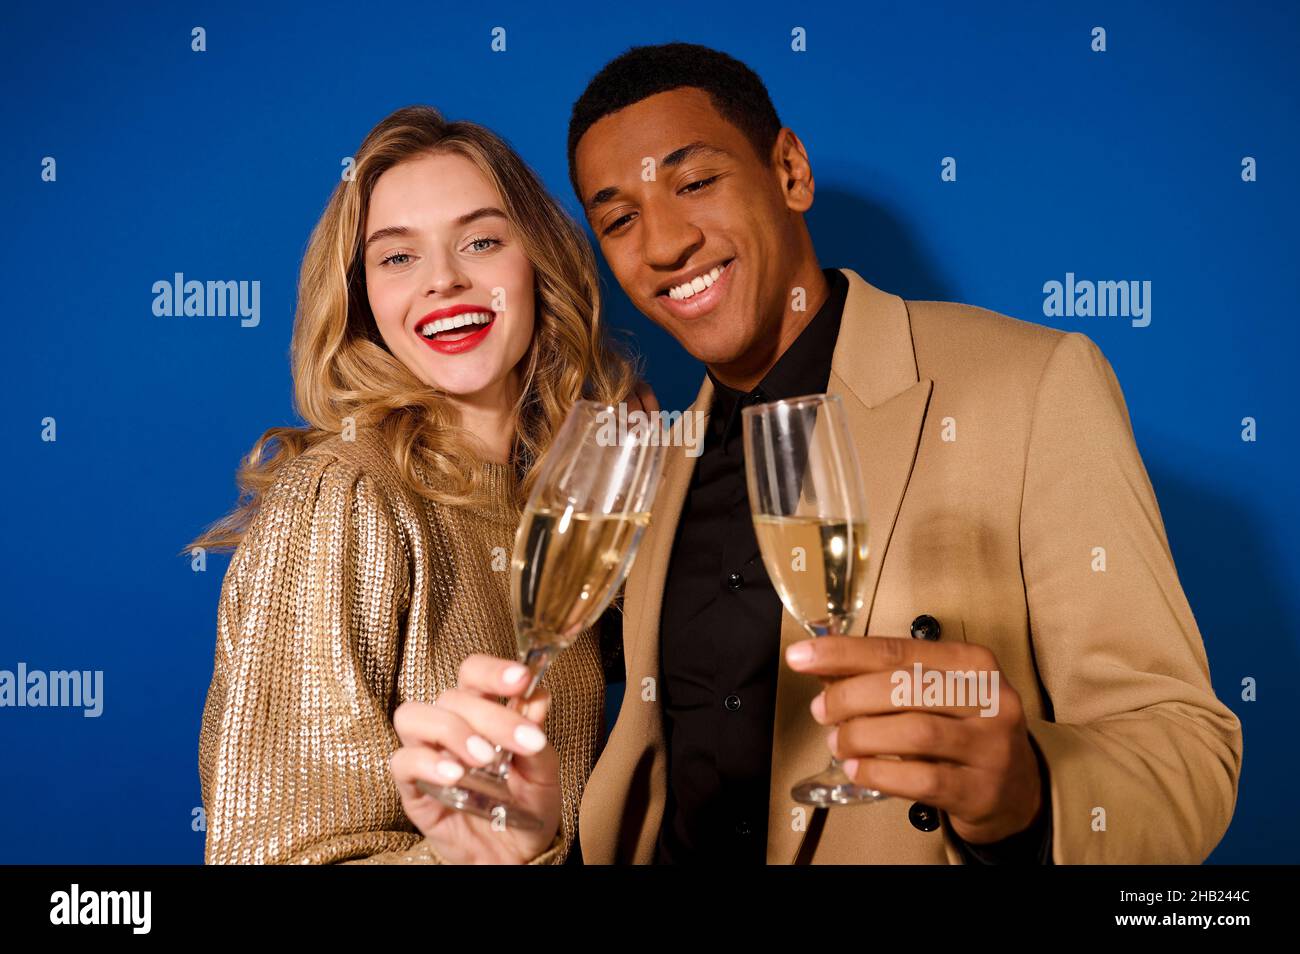 Smiling girl and guy holding glasses of champagne Stock Photo